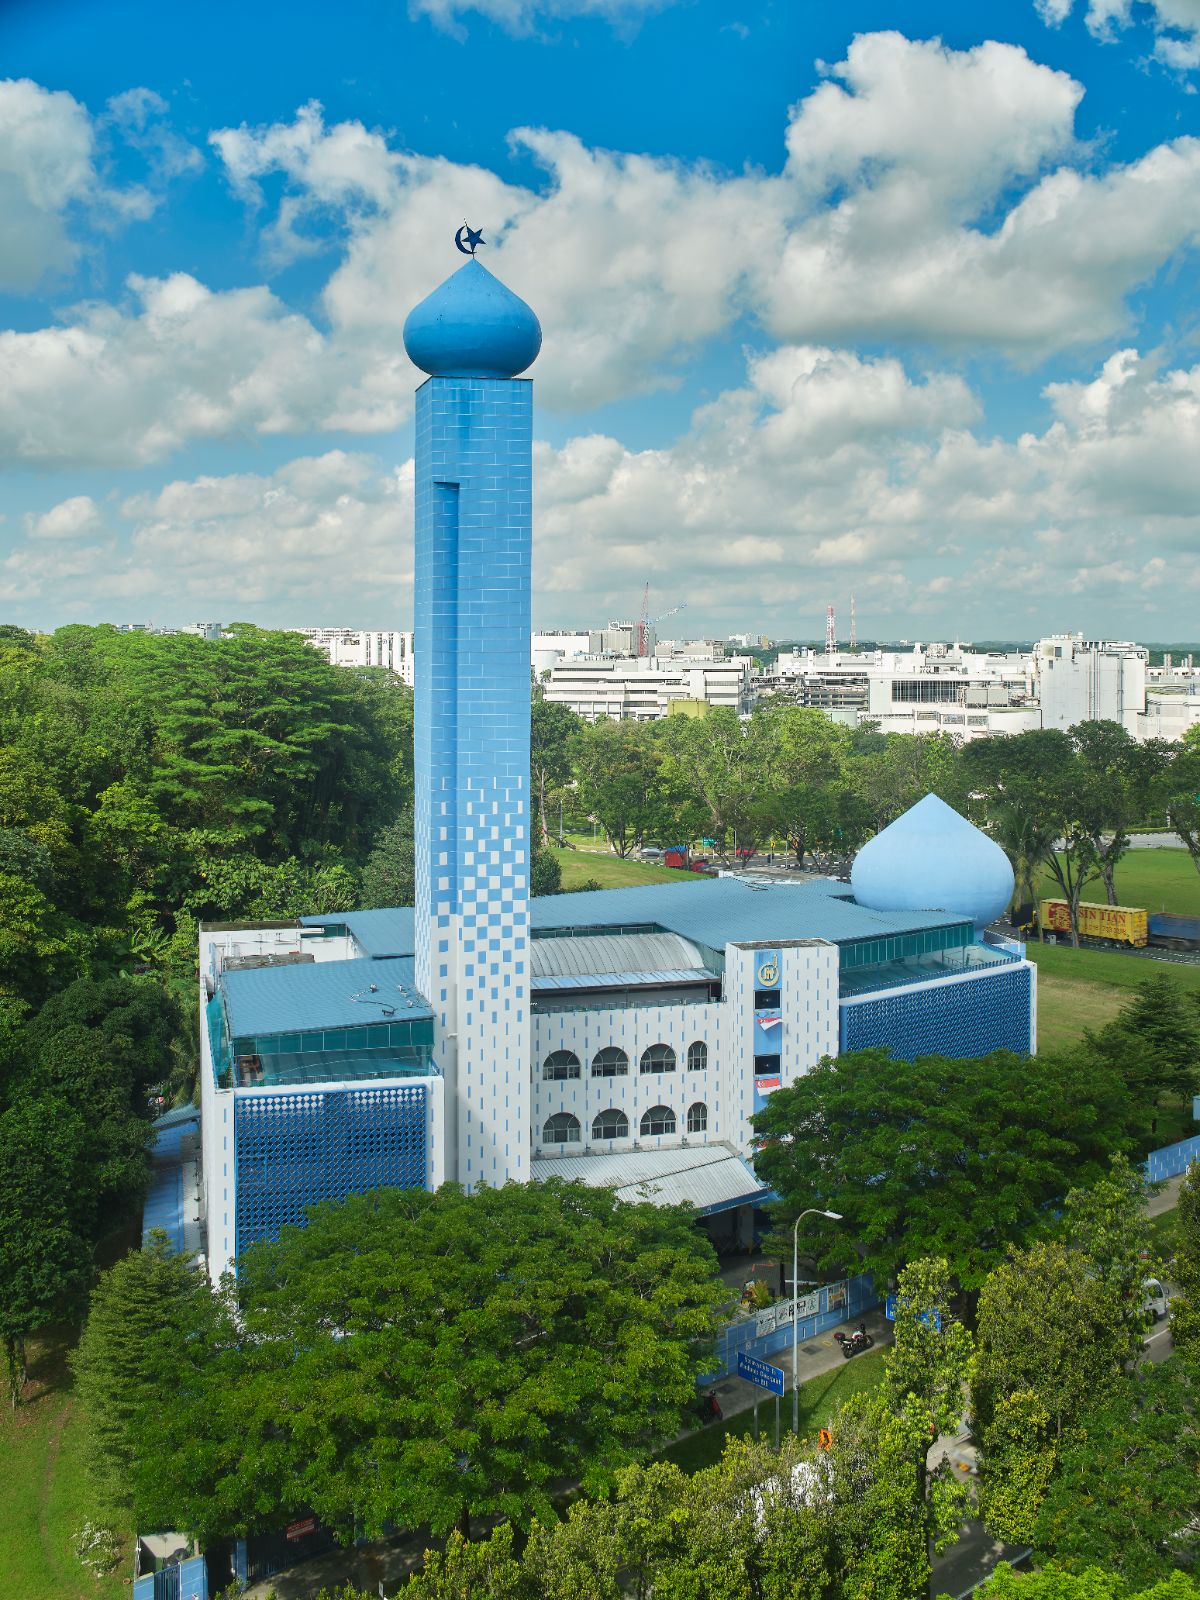 Opened on 20 April 1980, Masjid An-Nur was the first mosque built in Woodlands. It serves as a place of worship and a community space for Woodlands’ Muslim residents as well as Malaysians working in Singapore. 